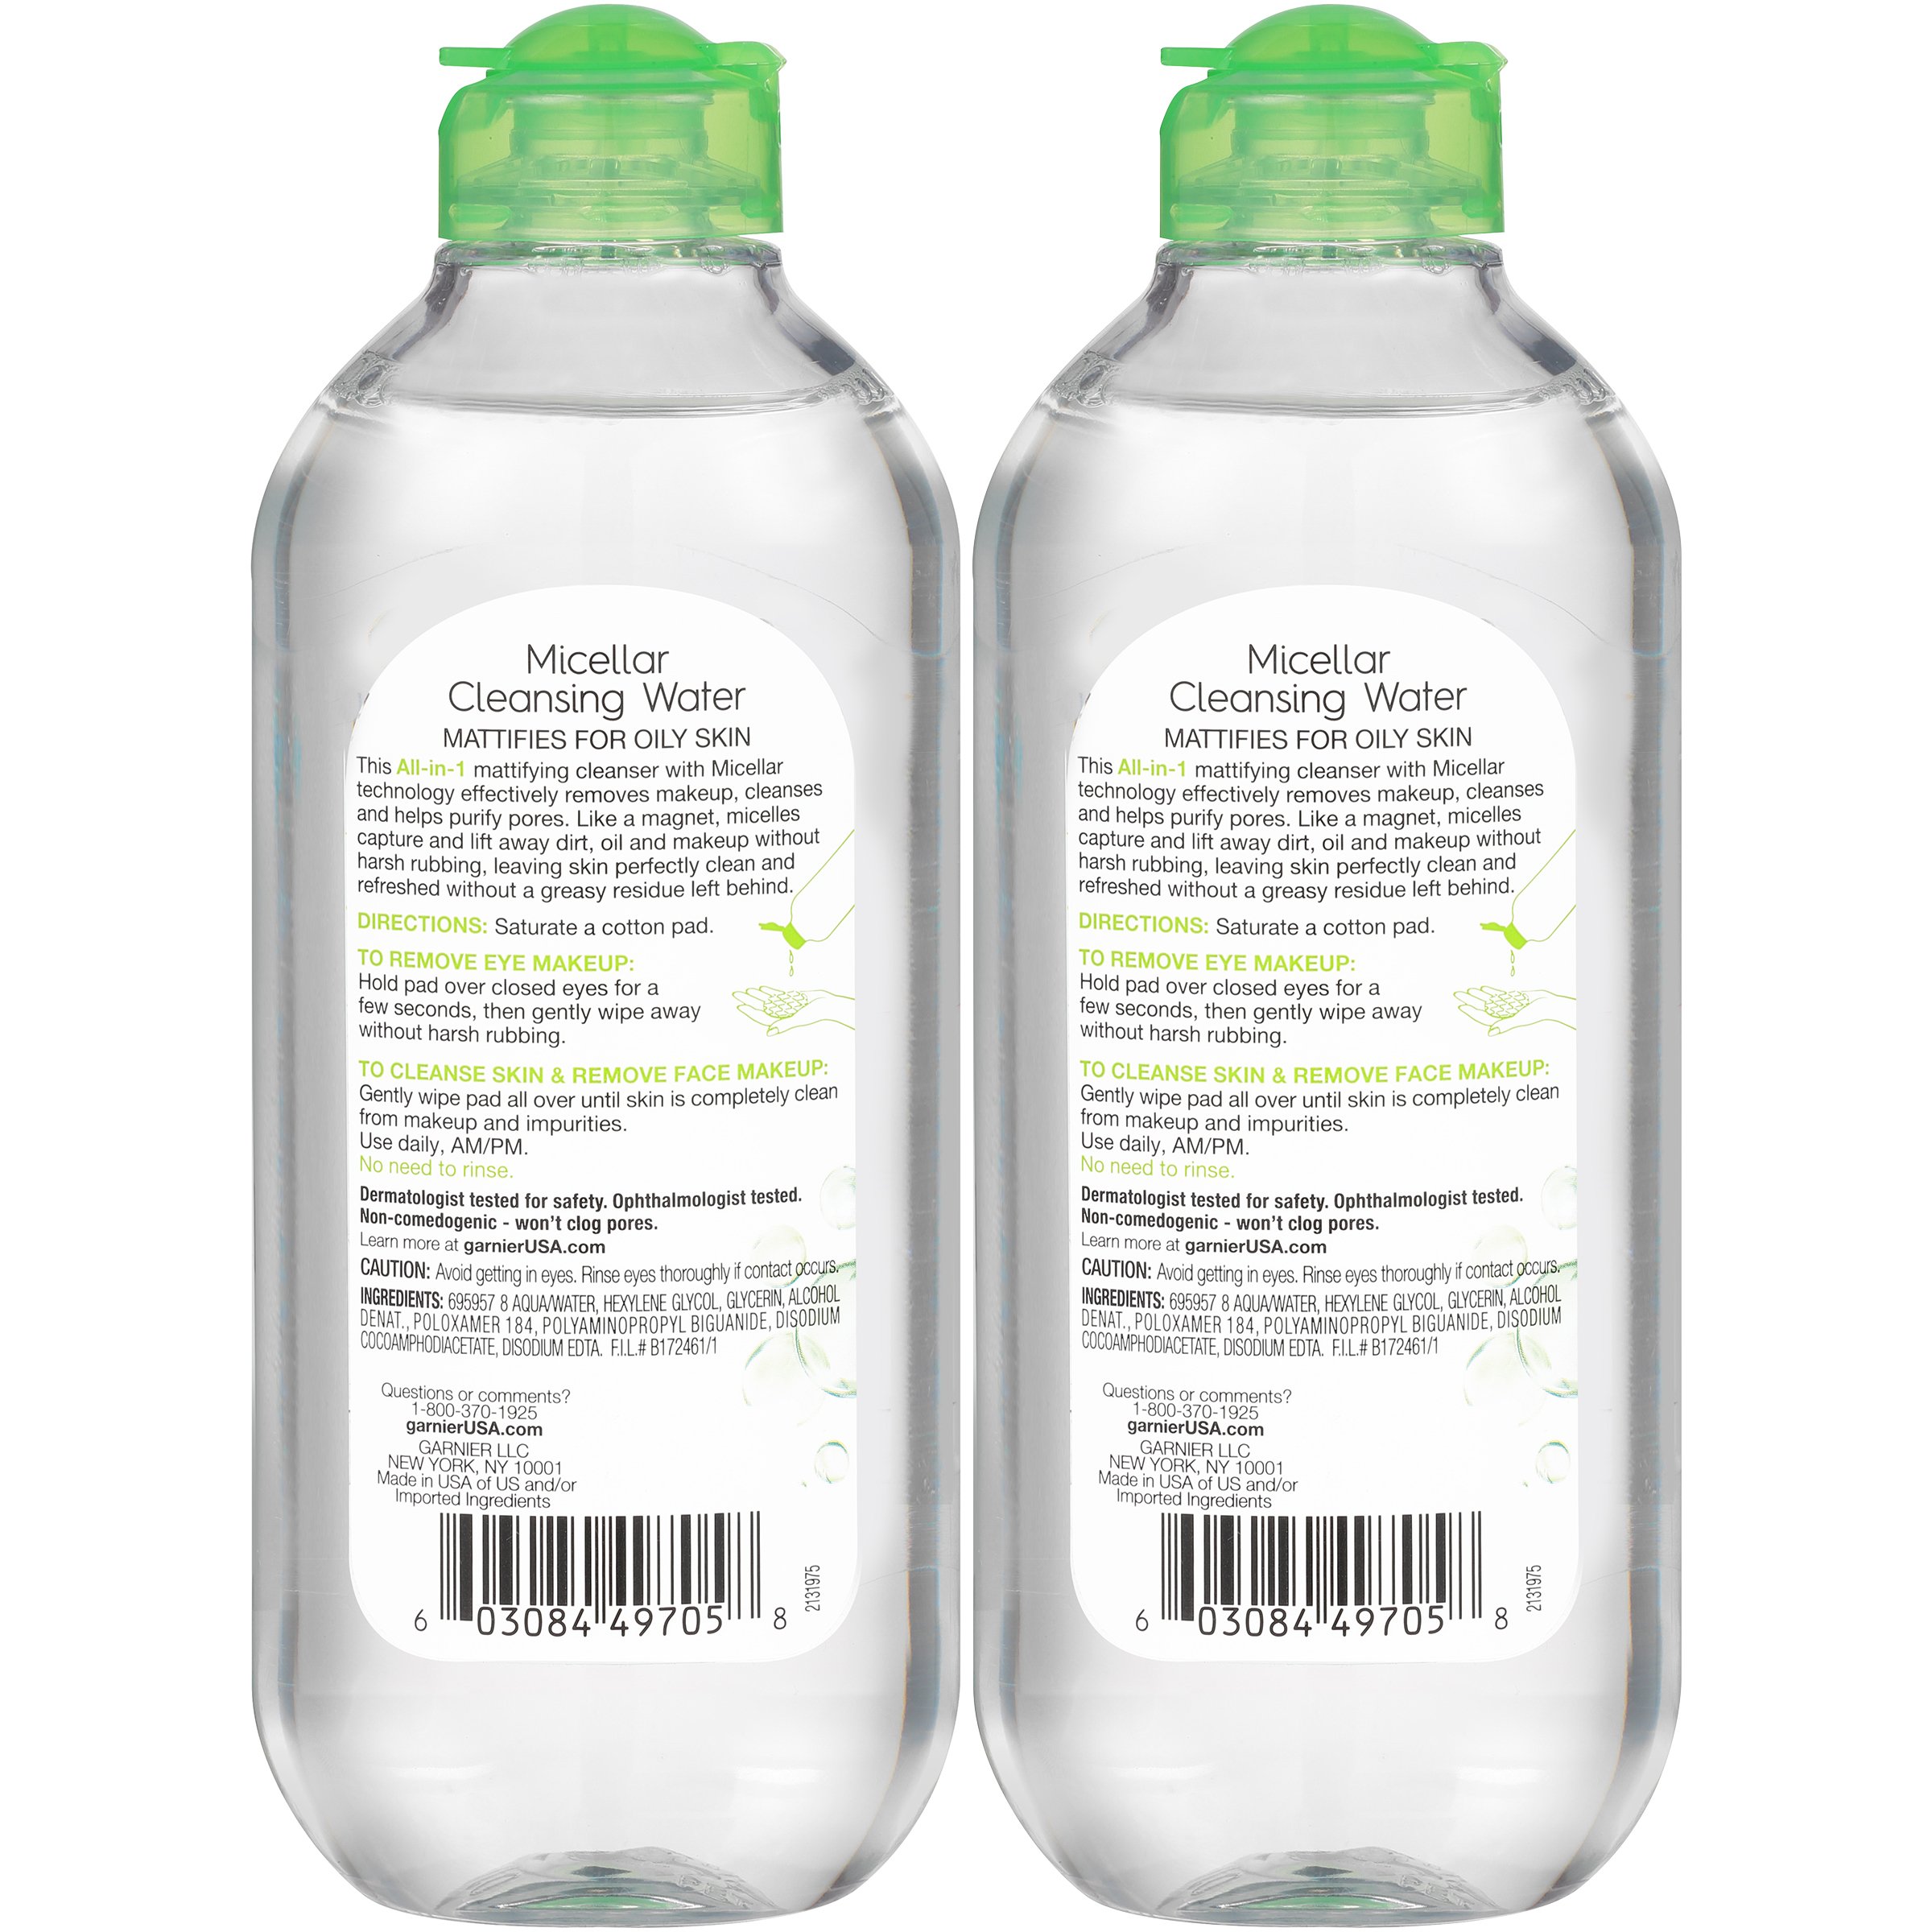 Garnier SkinActive Micellar Water for Oily Skin, Facial Cleanser & Makeup Remover, 13.5 Fl Oz (400mL) 2 Count (Packaging May Vary)